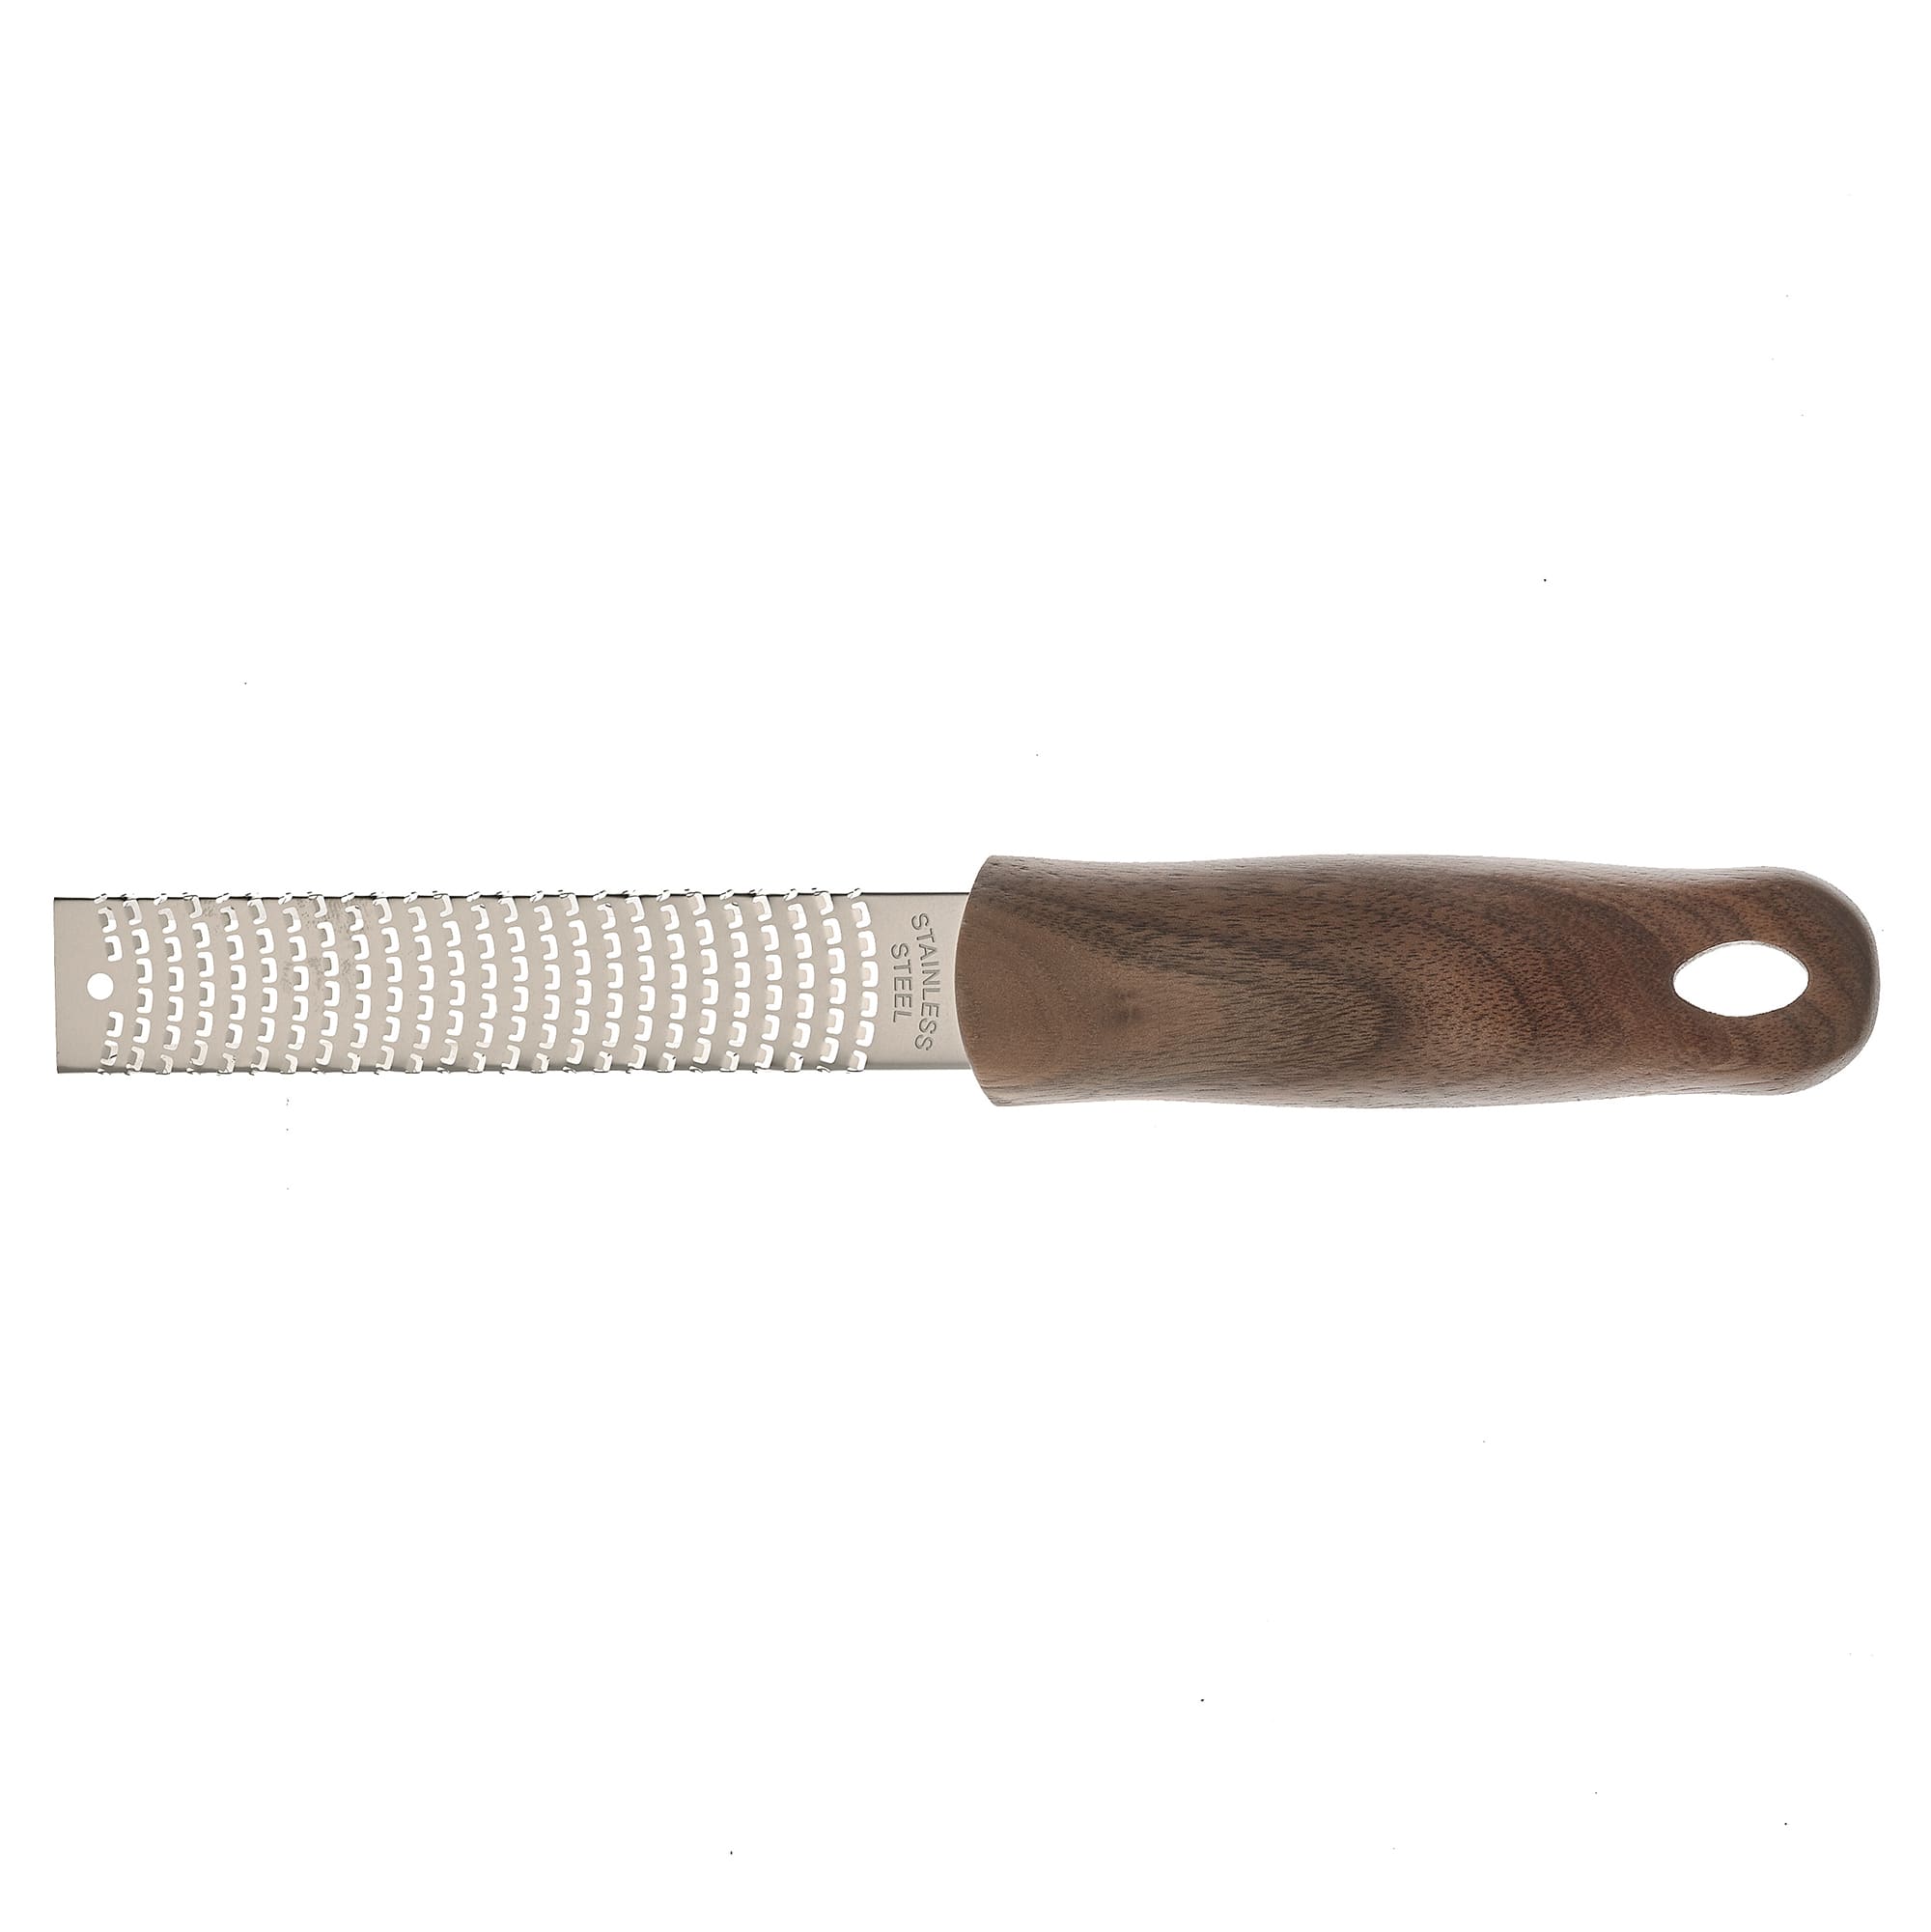 Barfly M37178 10 Bar Zester w/ Cover - Walnut Handle, Stainless